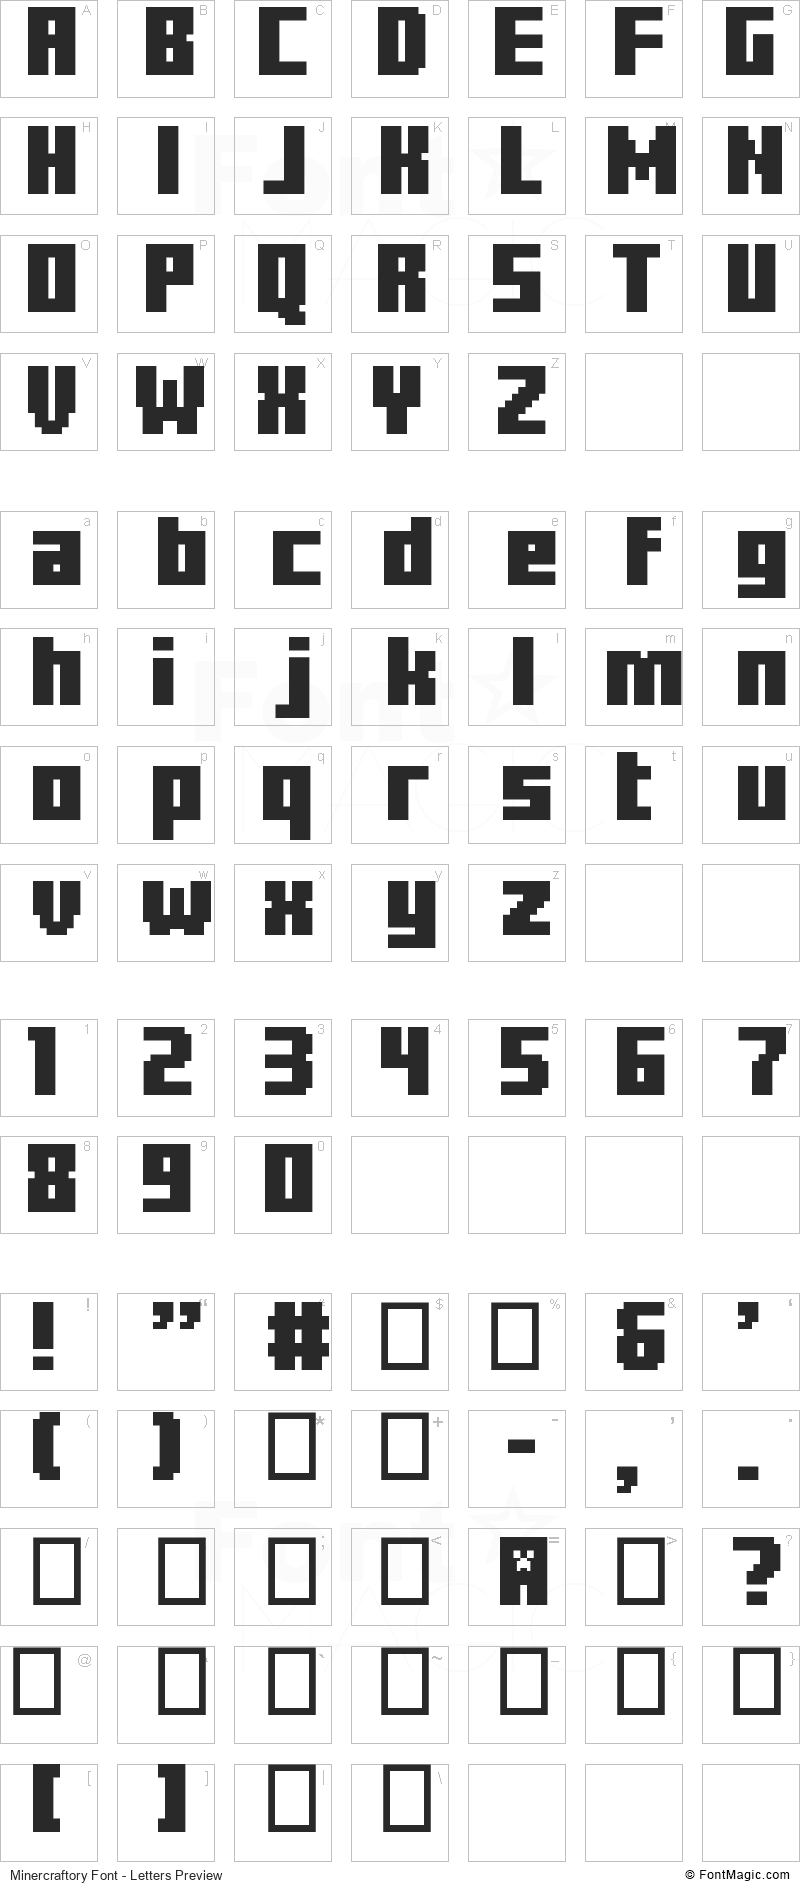 Minercraftory Font - All Latters Preview Chart